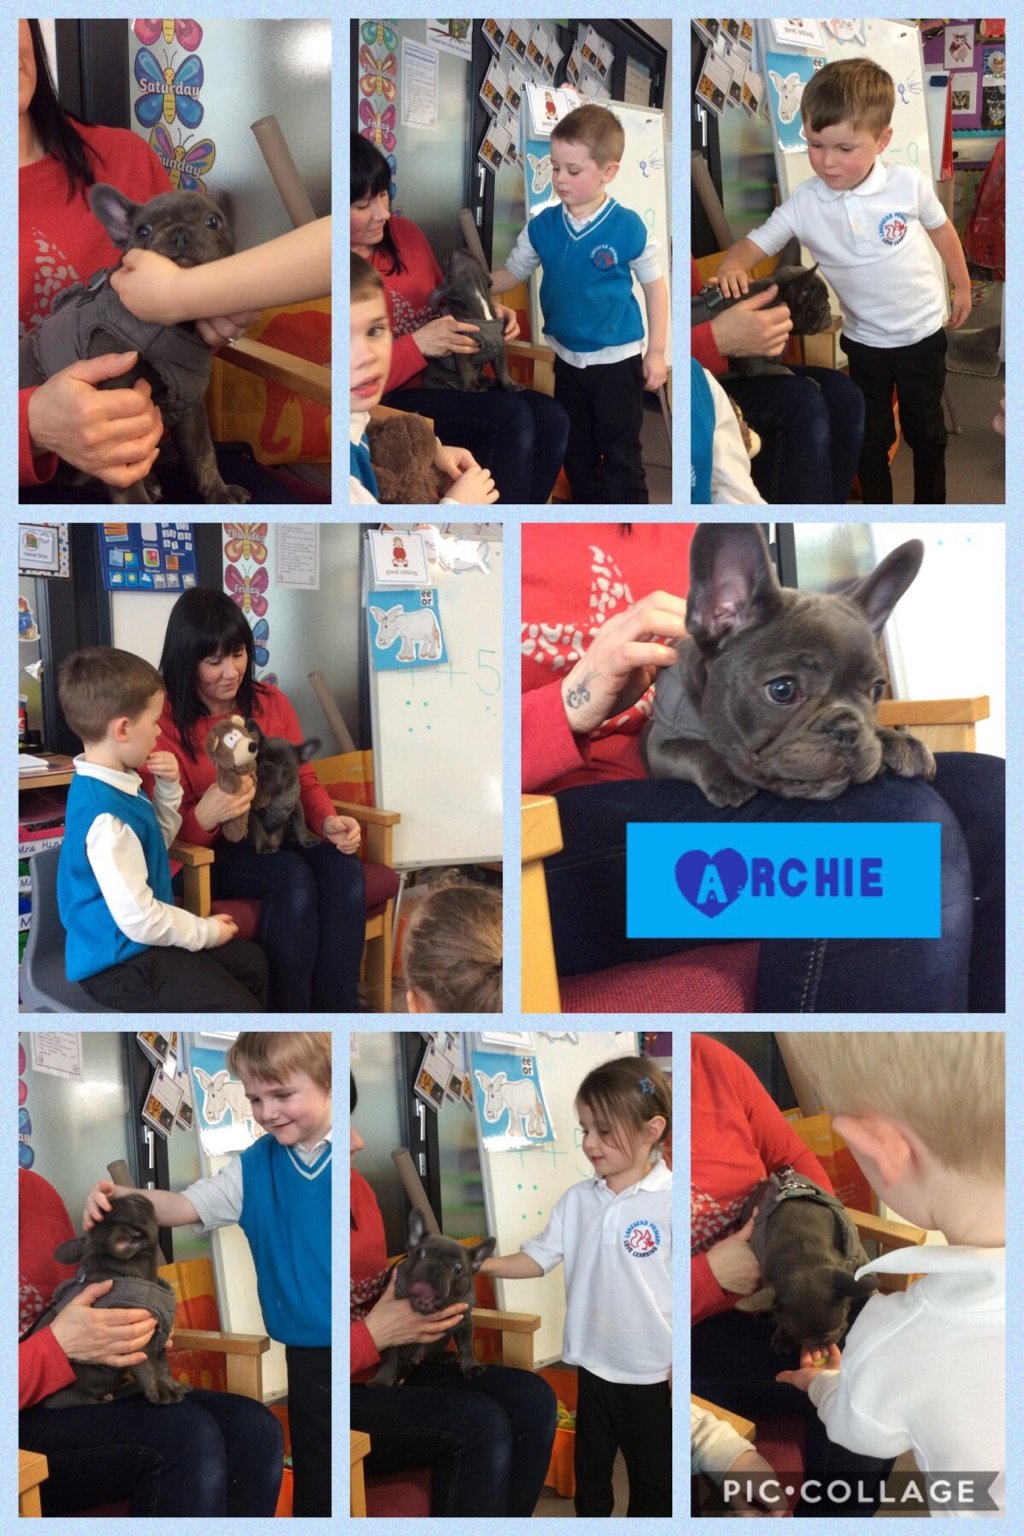 Reception had a visit from Archie the puppy!